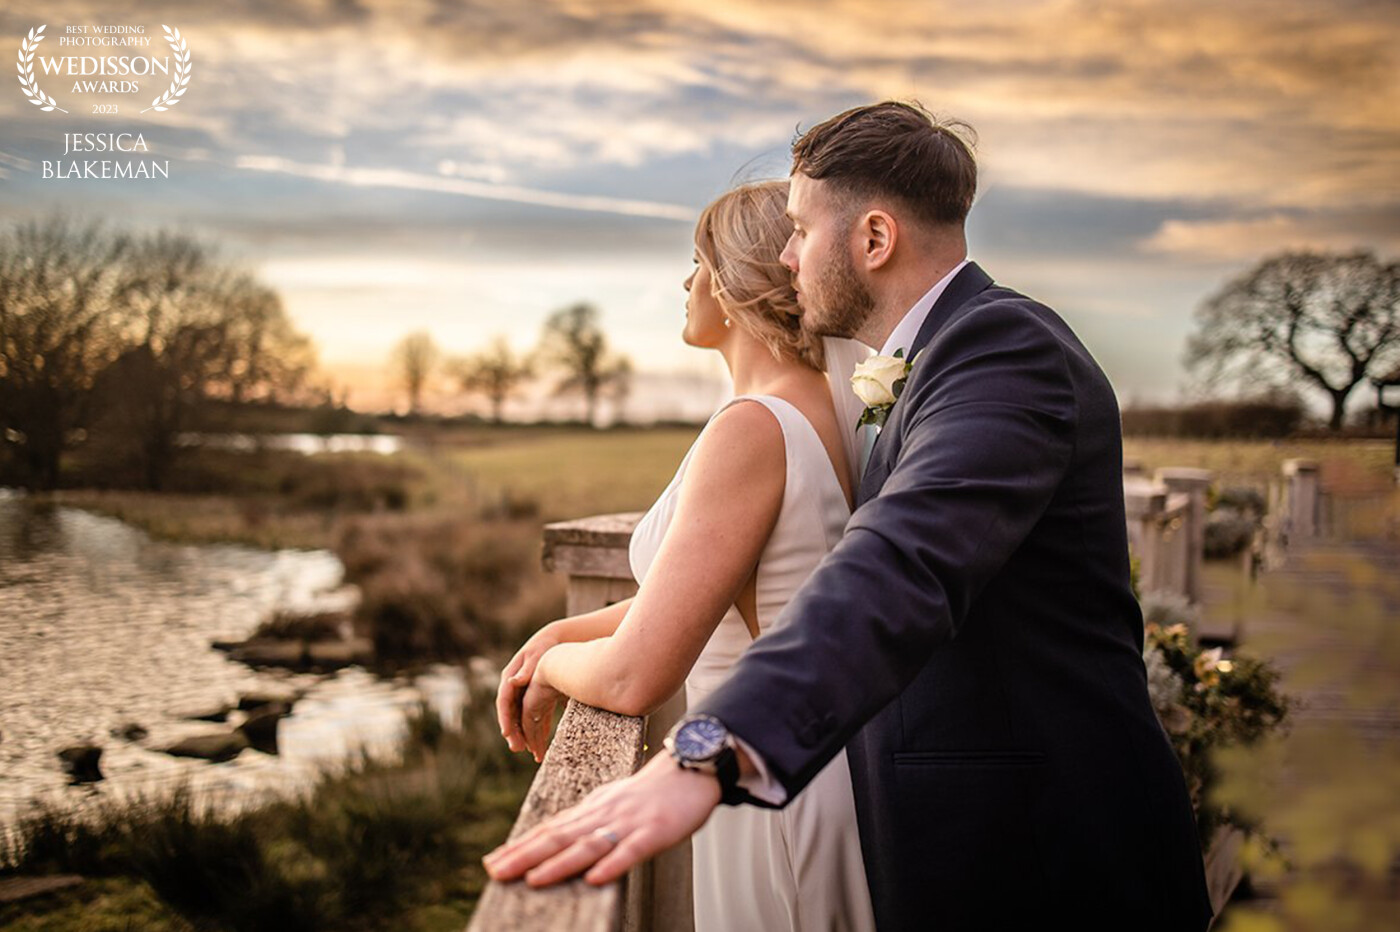 A stunningly beautiful day in Cheshire celebrating the Wedding of Adam and Stephanie. The icing on the cake was this beautiful sunset that the newlyweds looked out at over the lake, basking in the bliss of their day and picturing the future adventures they are yet to embark on.